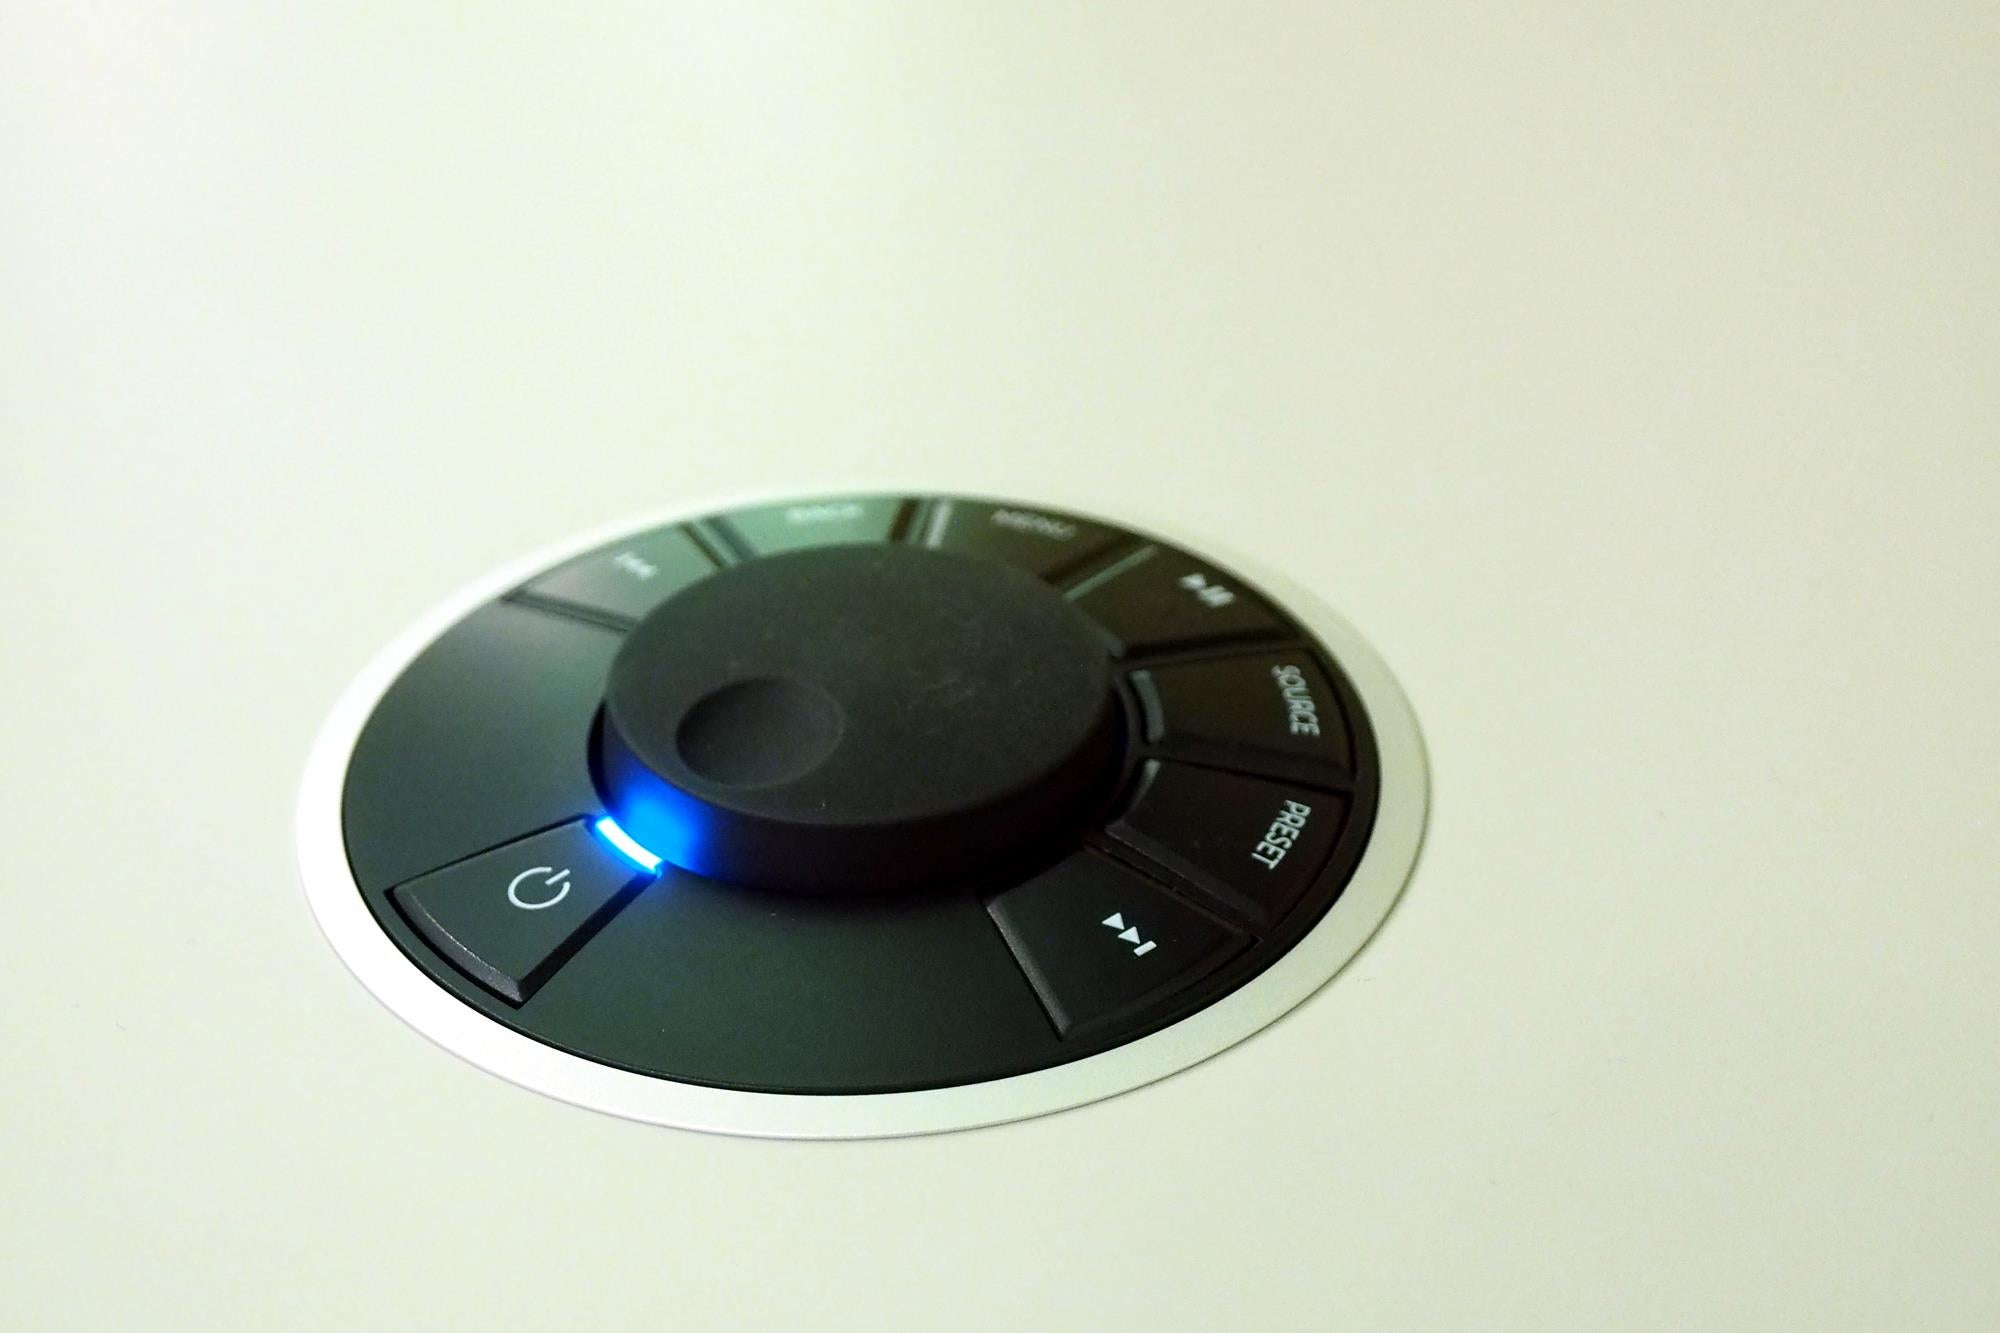 Close-up of Ruark Audio R7 Mk3 remote control with illuminated power button.